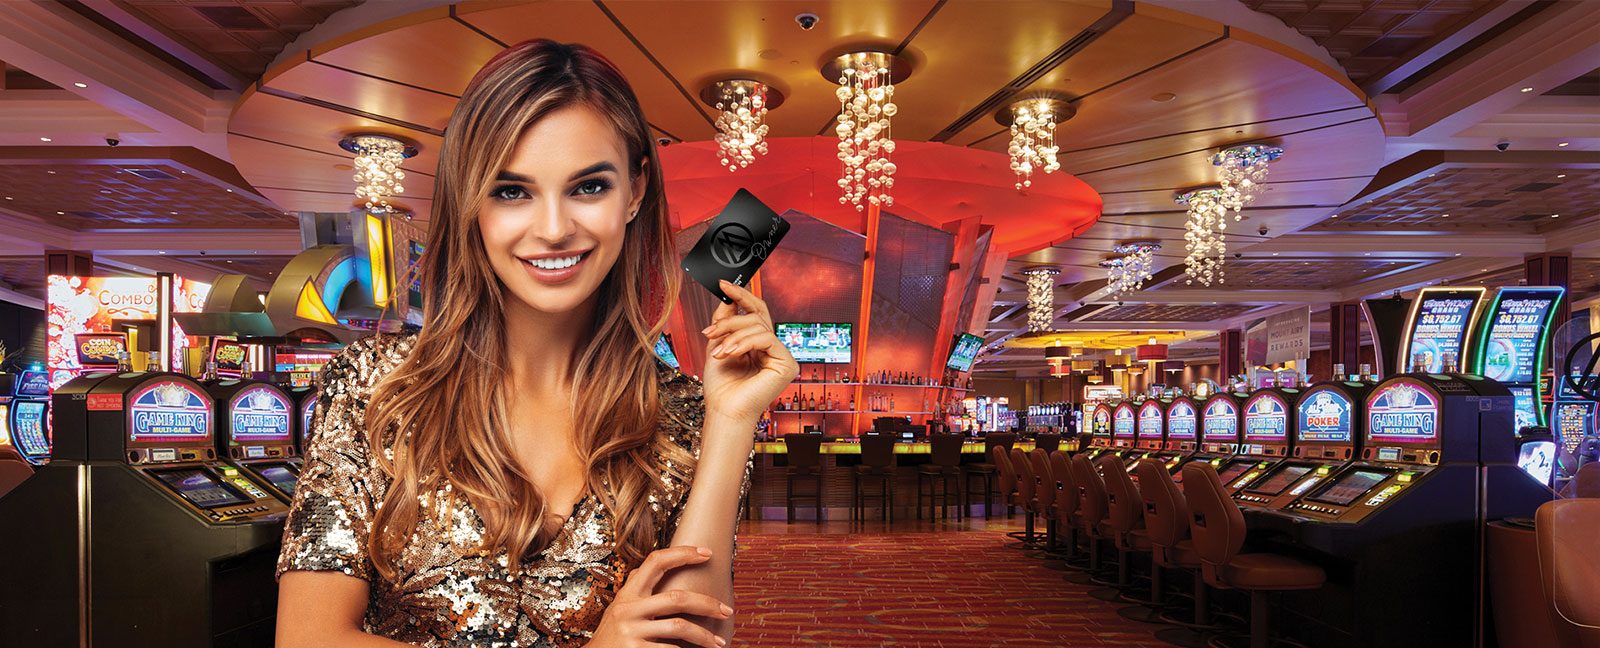 Why Are Casino Slots So Popular?